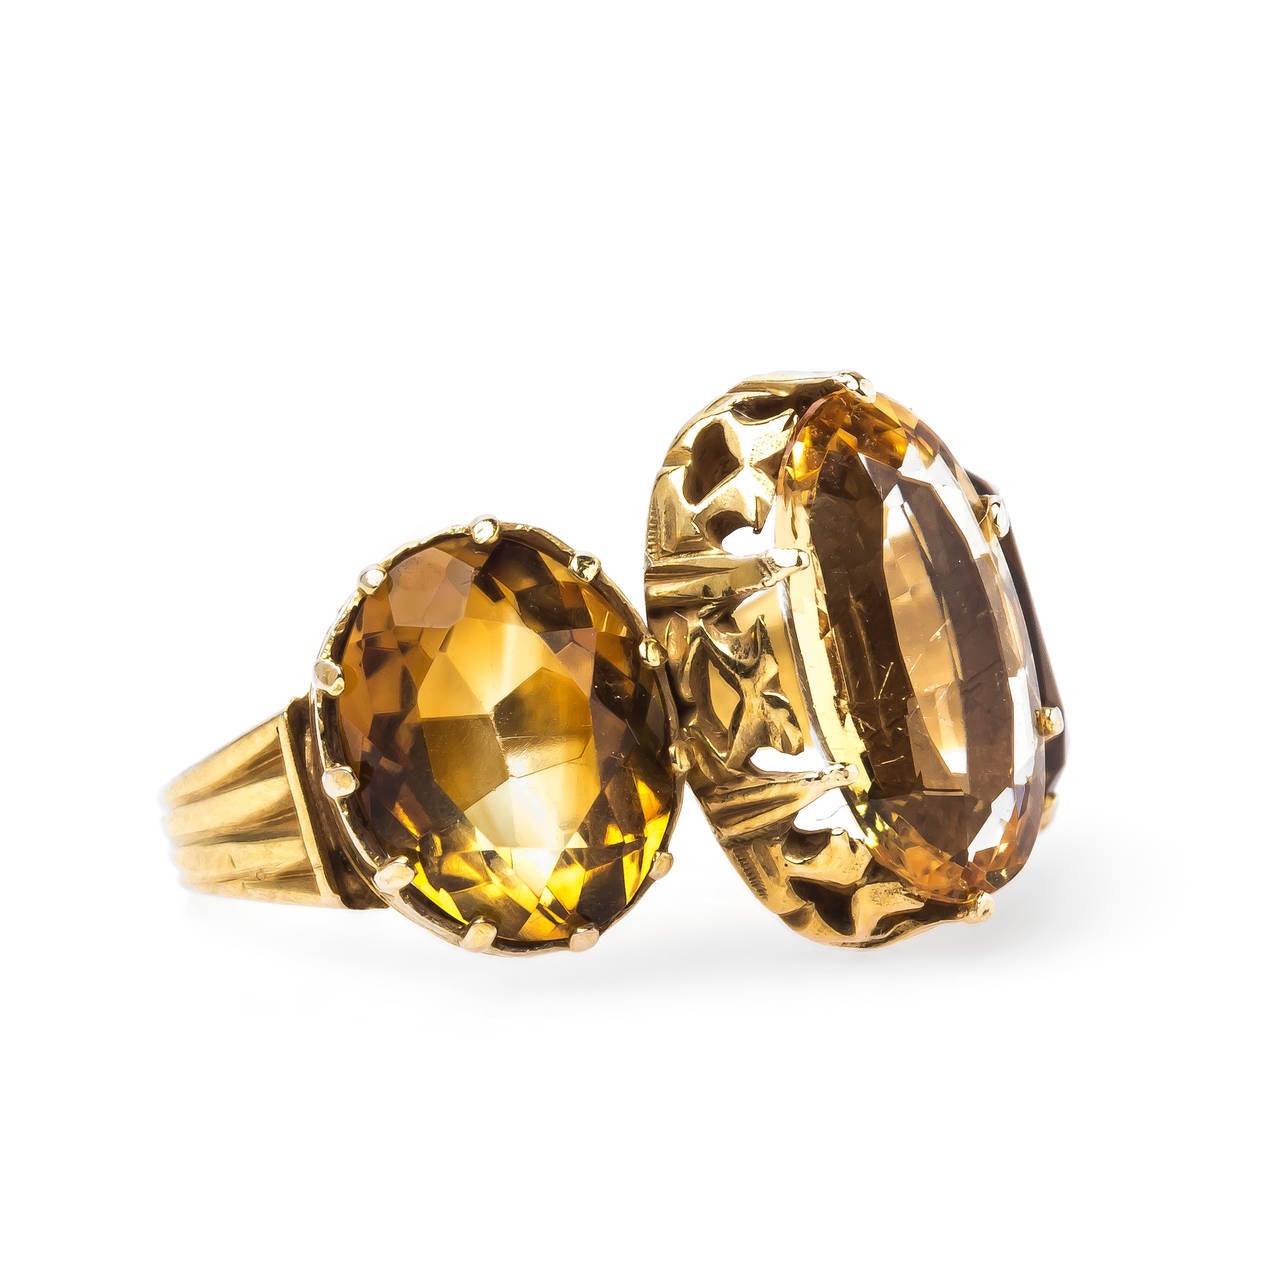 Sawmill is a fabulous authentic Victorian era (circa 1880) 14k yellow gold three-stone citrine ring centering a six-prong set elongated Oval light yellow citrine gauged at 2.85ct and flanked on either side by two Oval citrines both saturated a